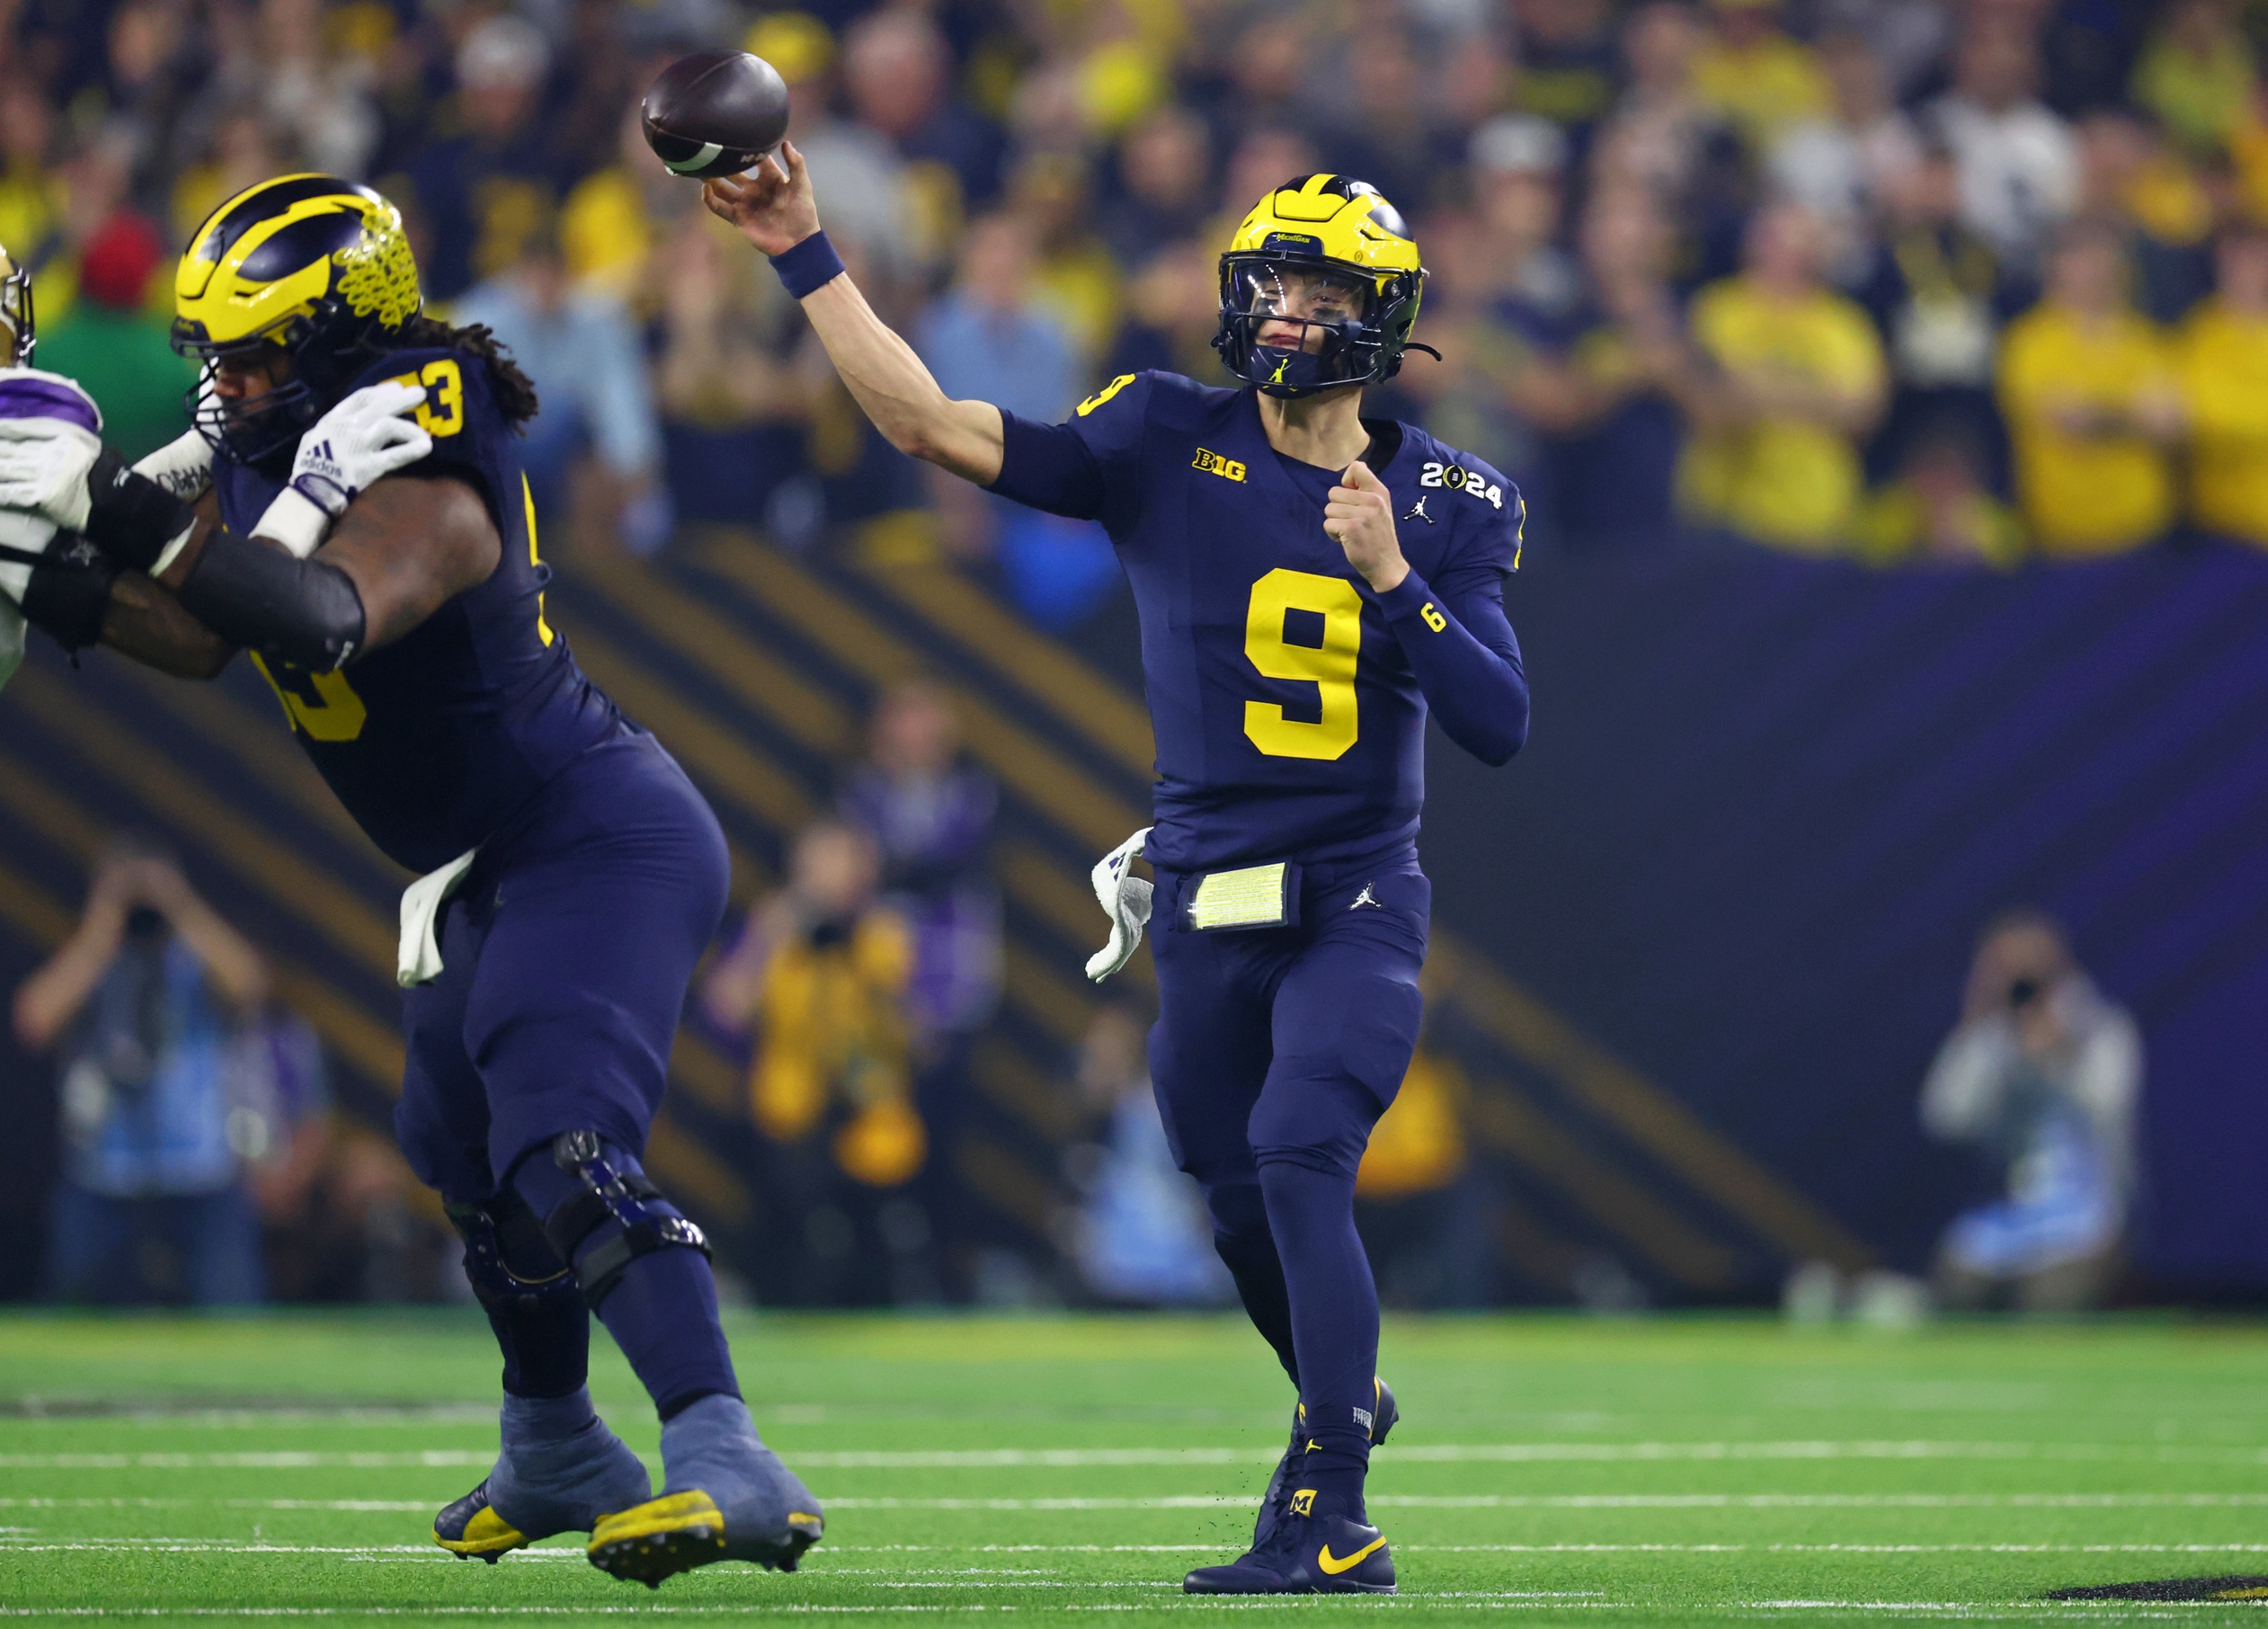 Michigan Wolverines quarterback J.J. McCarthy (9) passes the ball against the Washington Huskies during the first quarter in the 2024 College Football Playoff national championship game at NRG Stadium. Mandatory Credit: Mark J. Rebilas-USA TODAY Sports